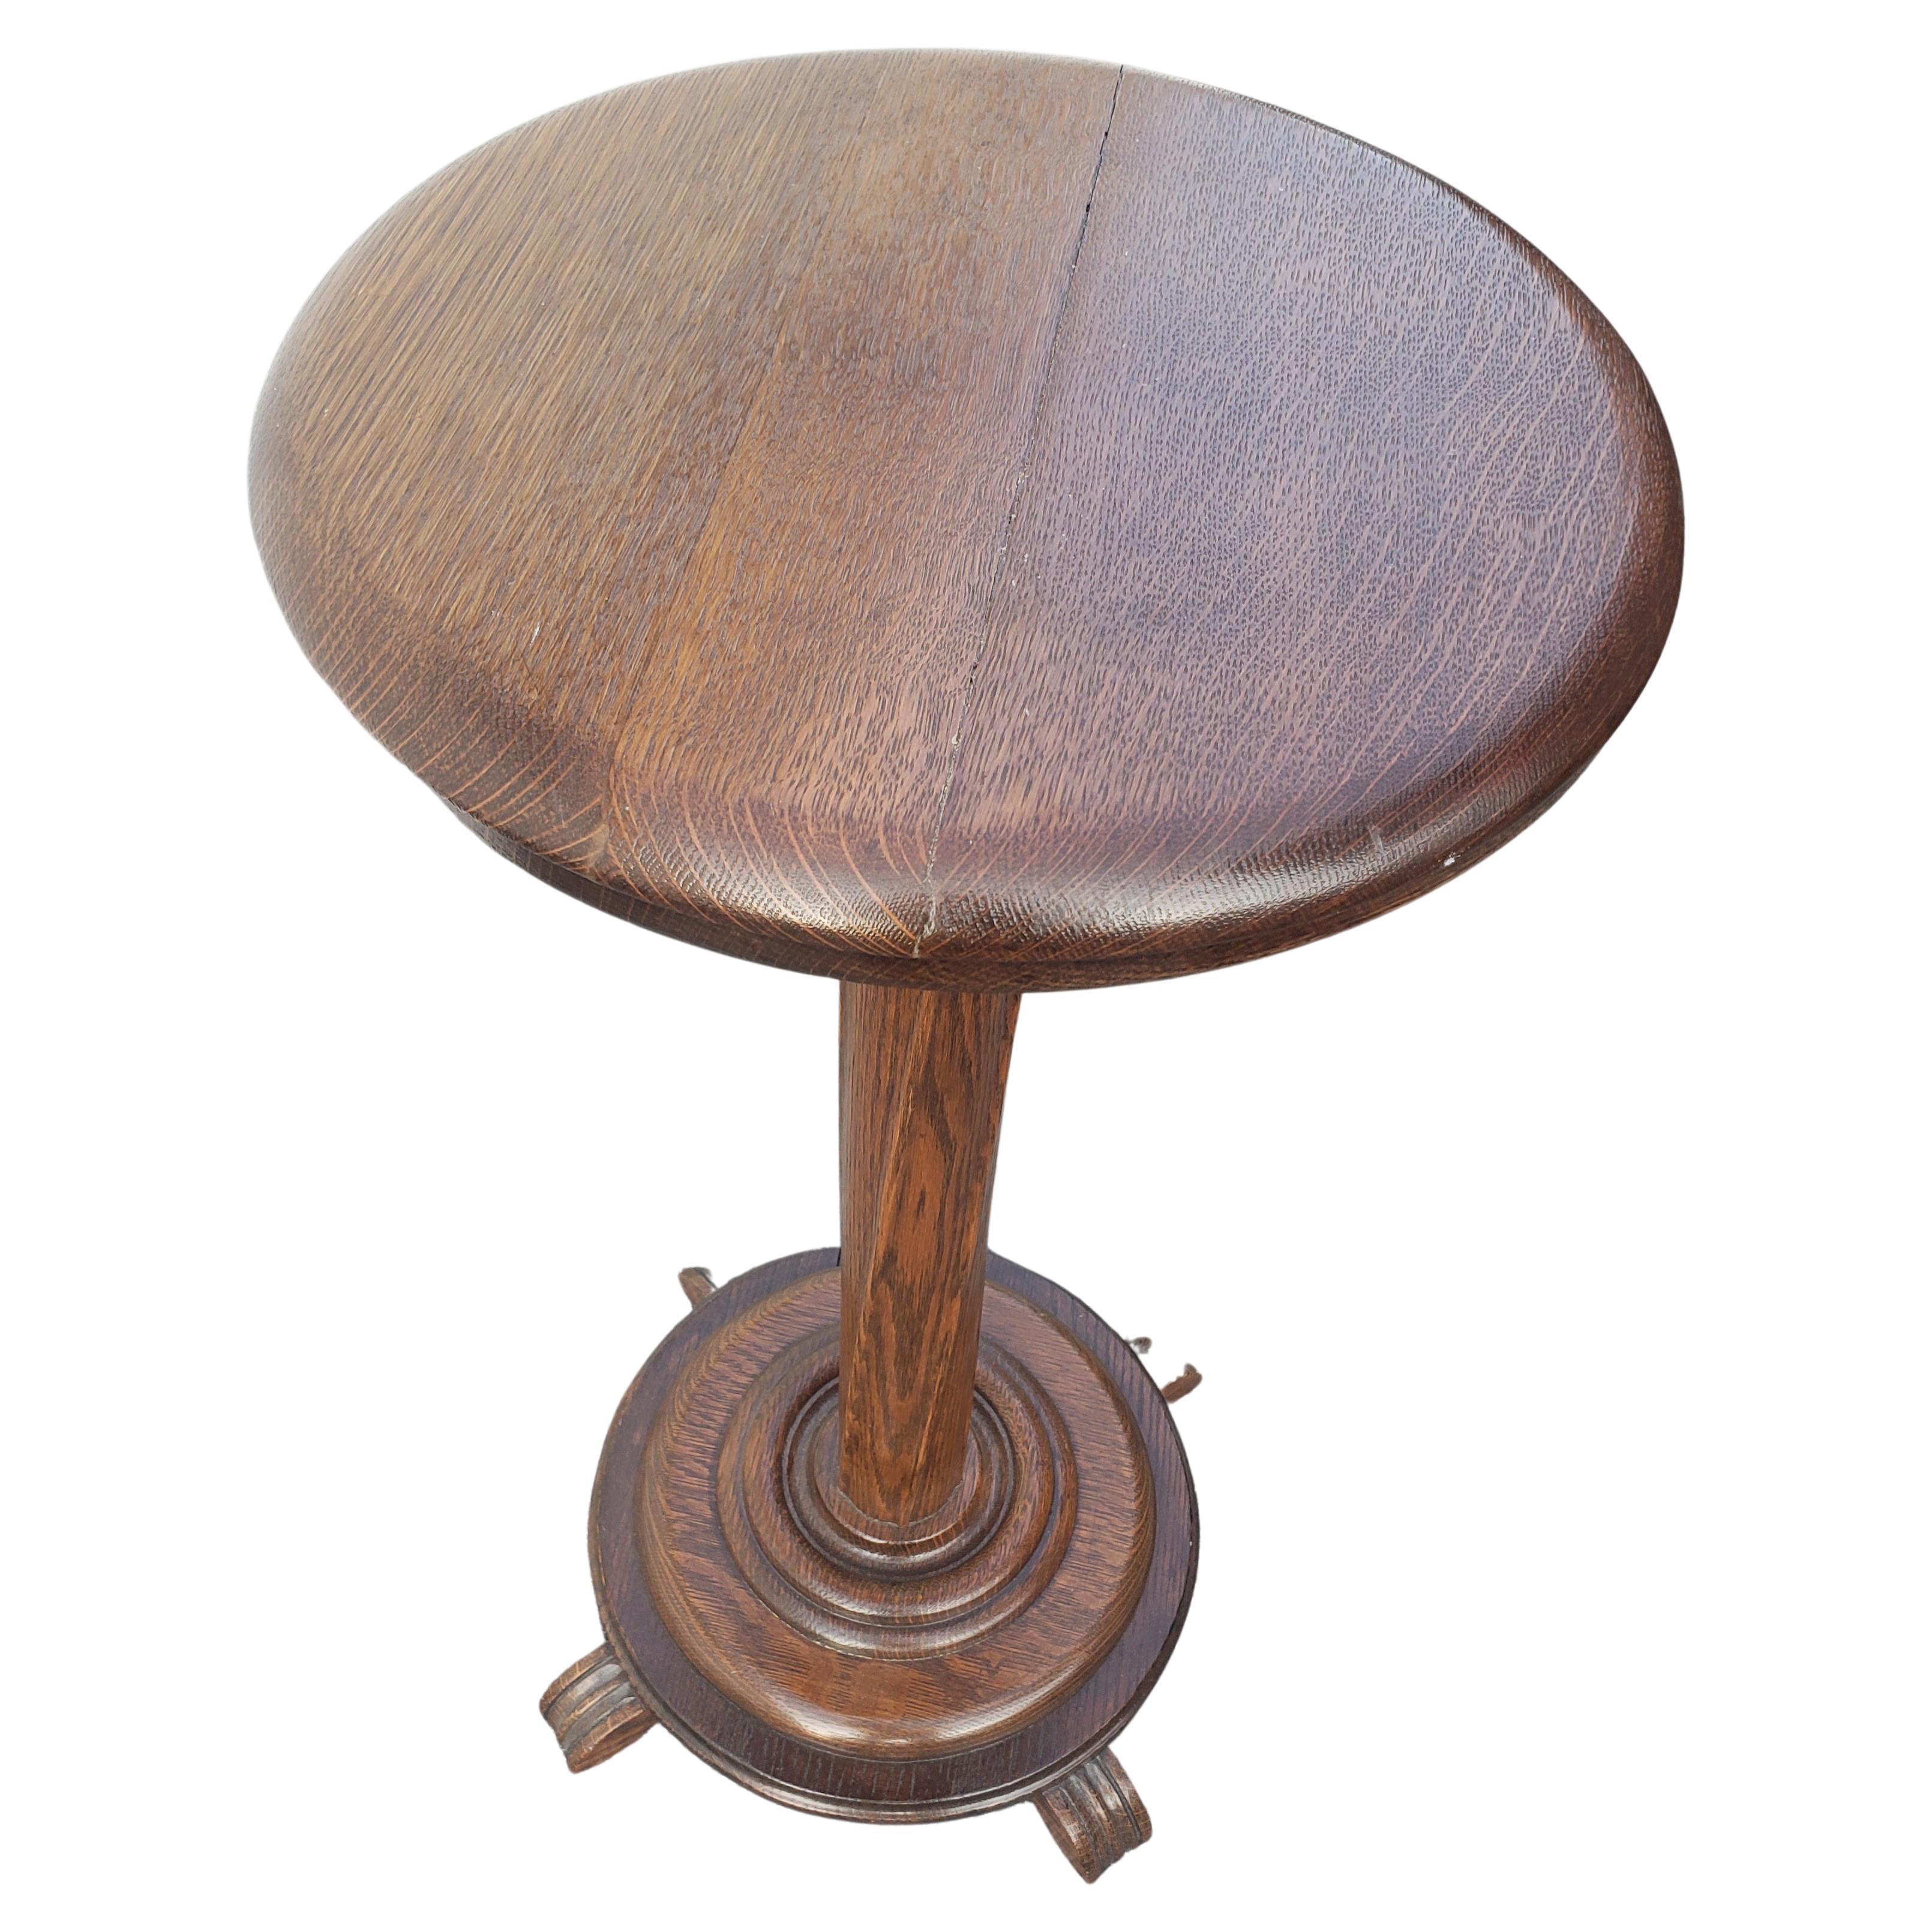 Edwardian Mid-Century Edwadian Style Stained Solid Oak Pedestal Plant Stand For Sale